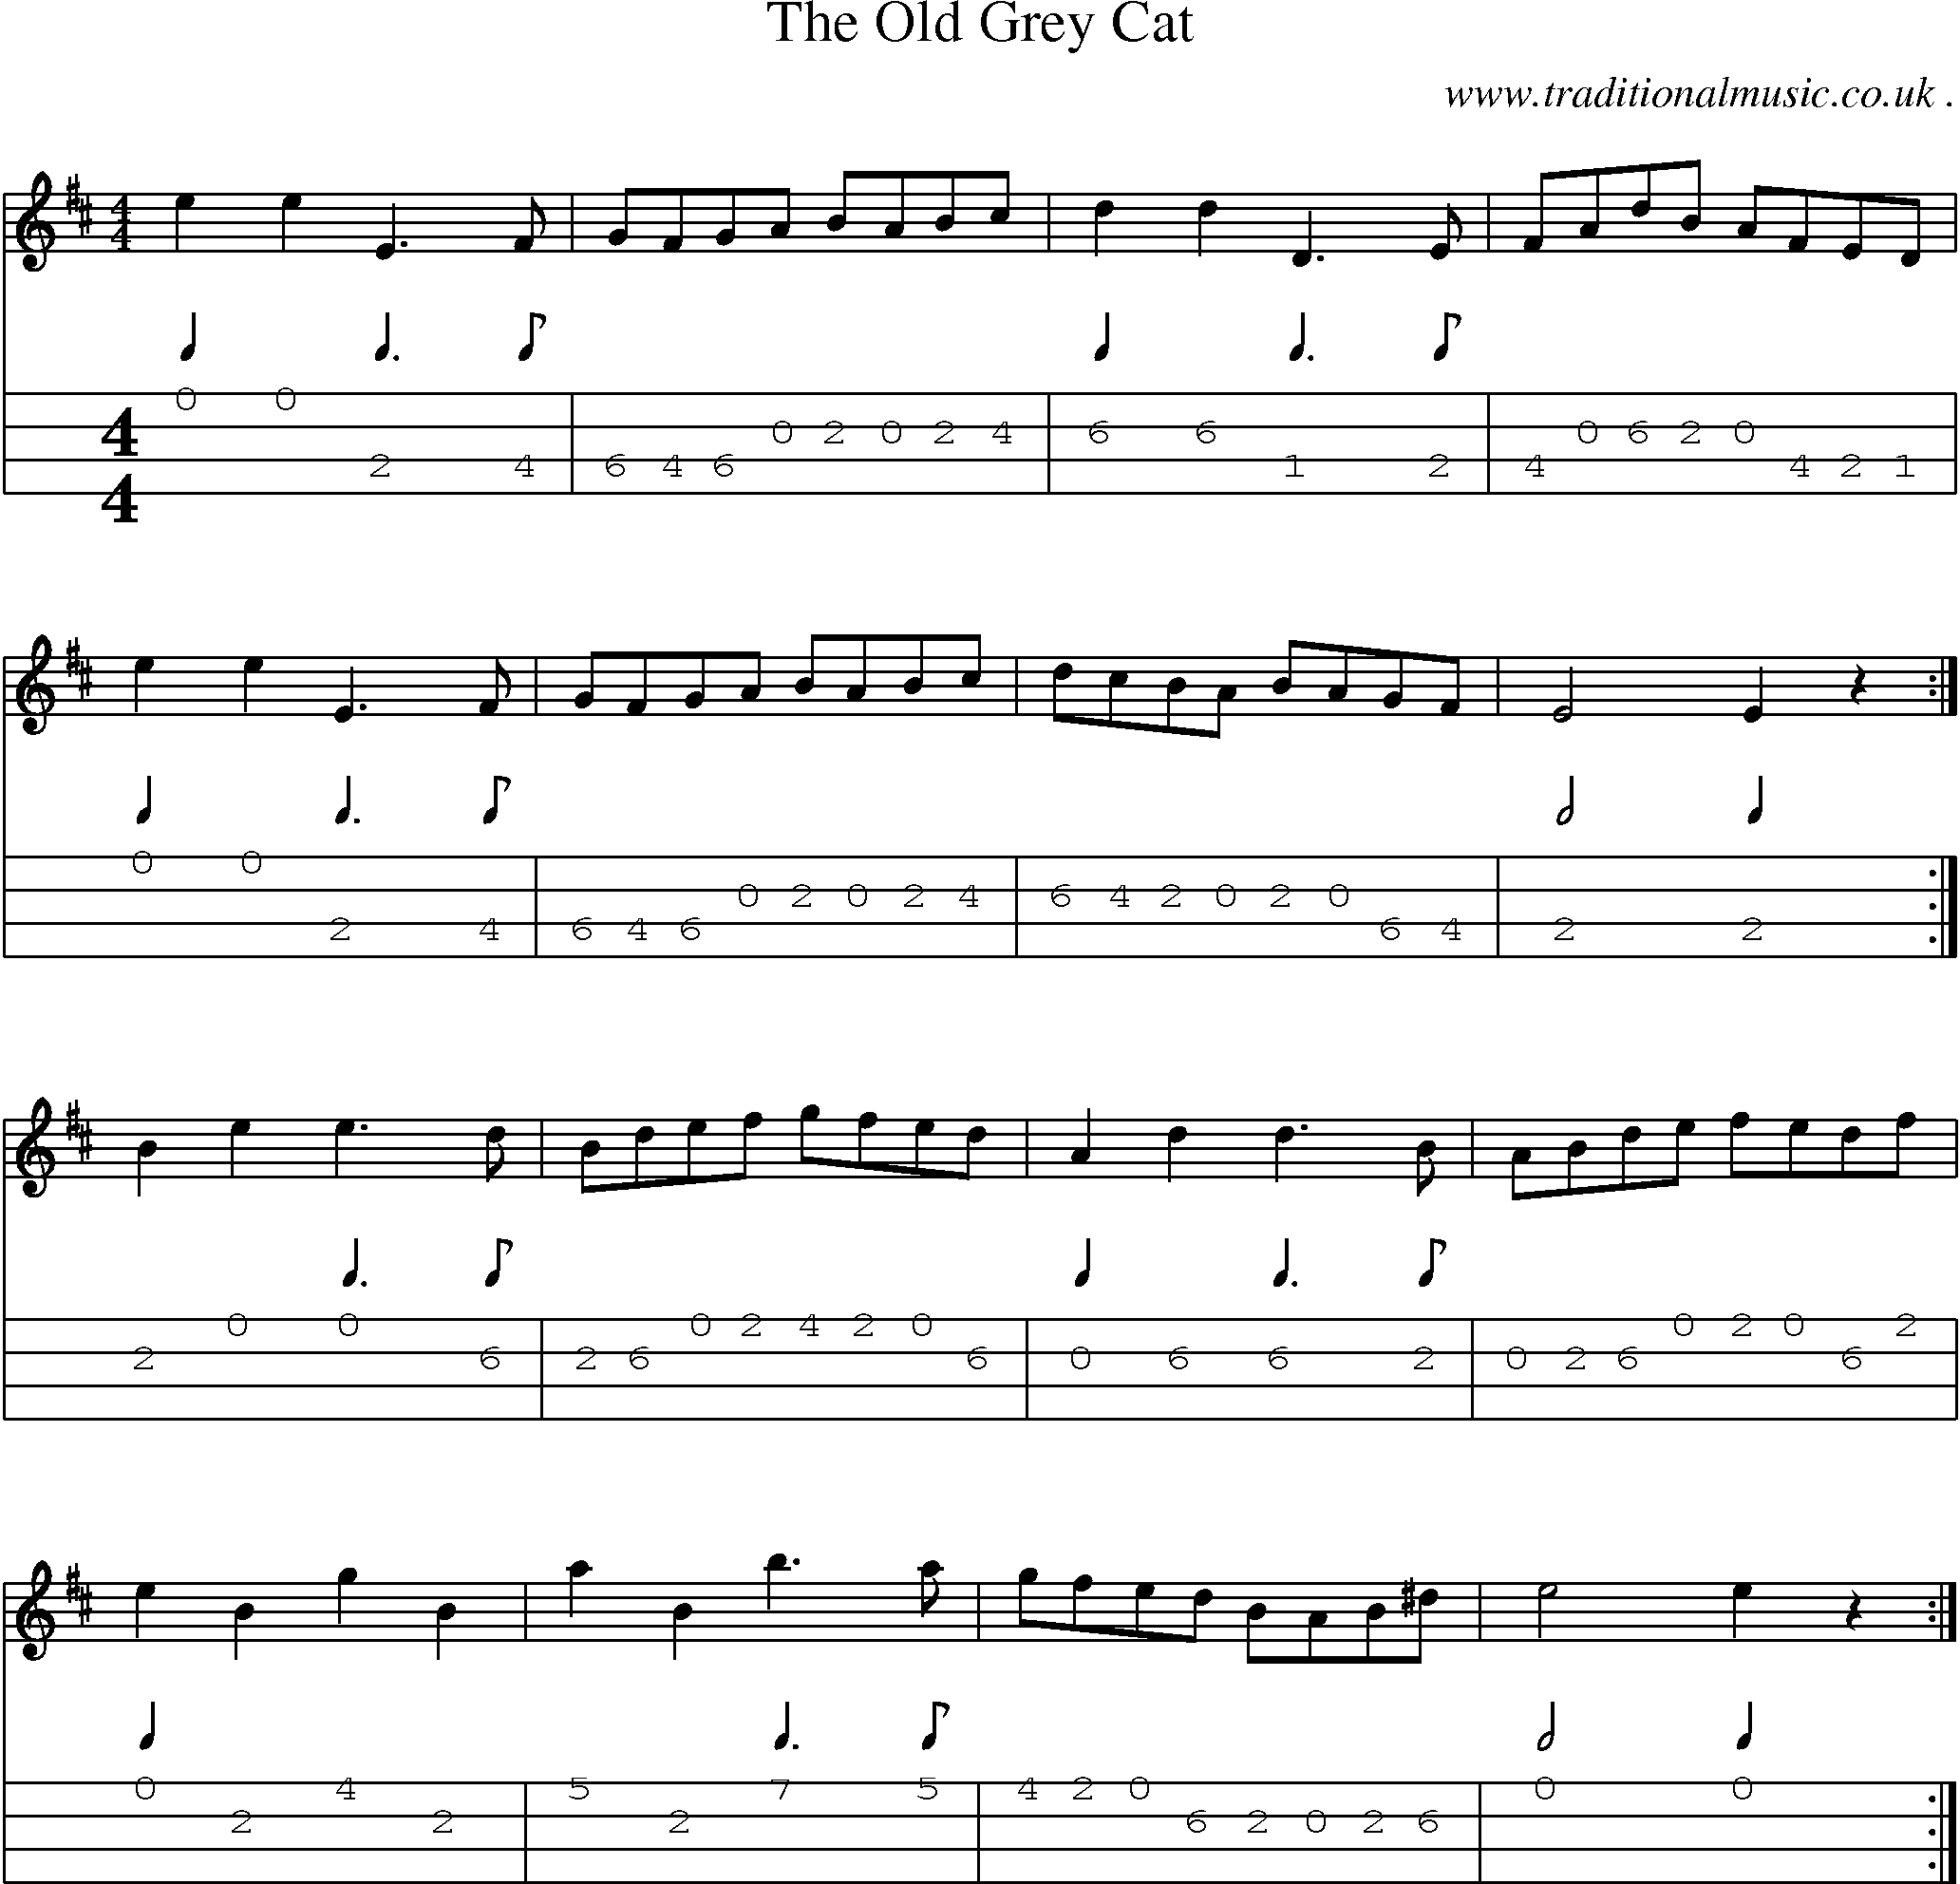 Sheet-music  score, Chords and Mandolin Tabs for The Old Grey Cat